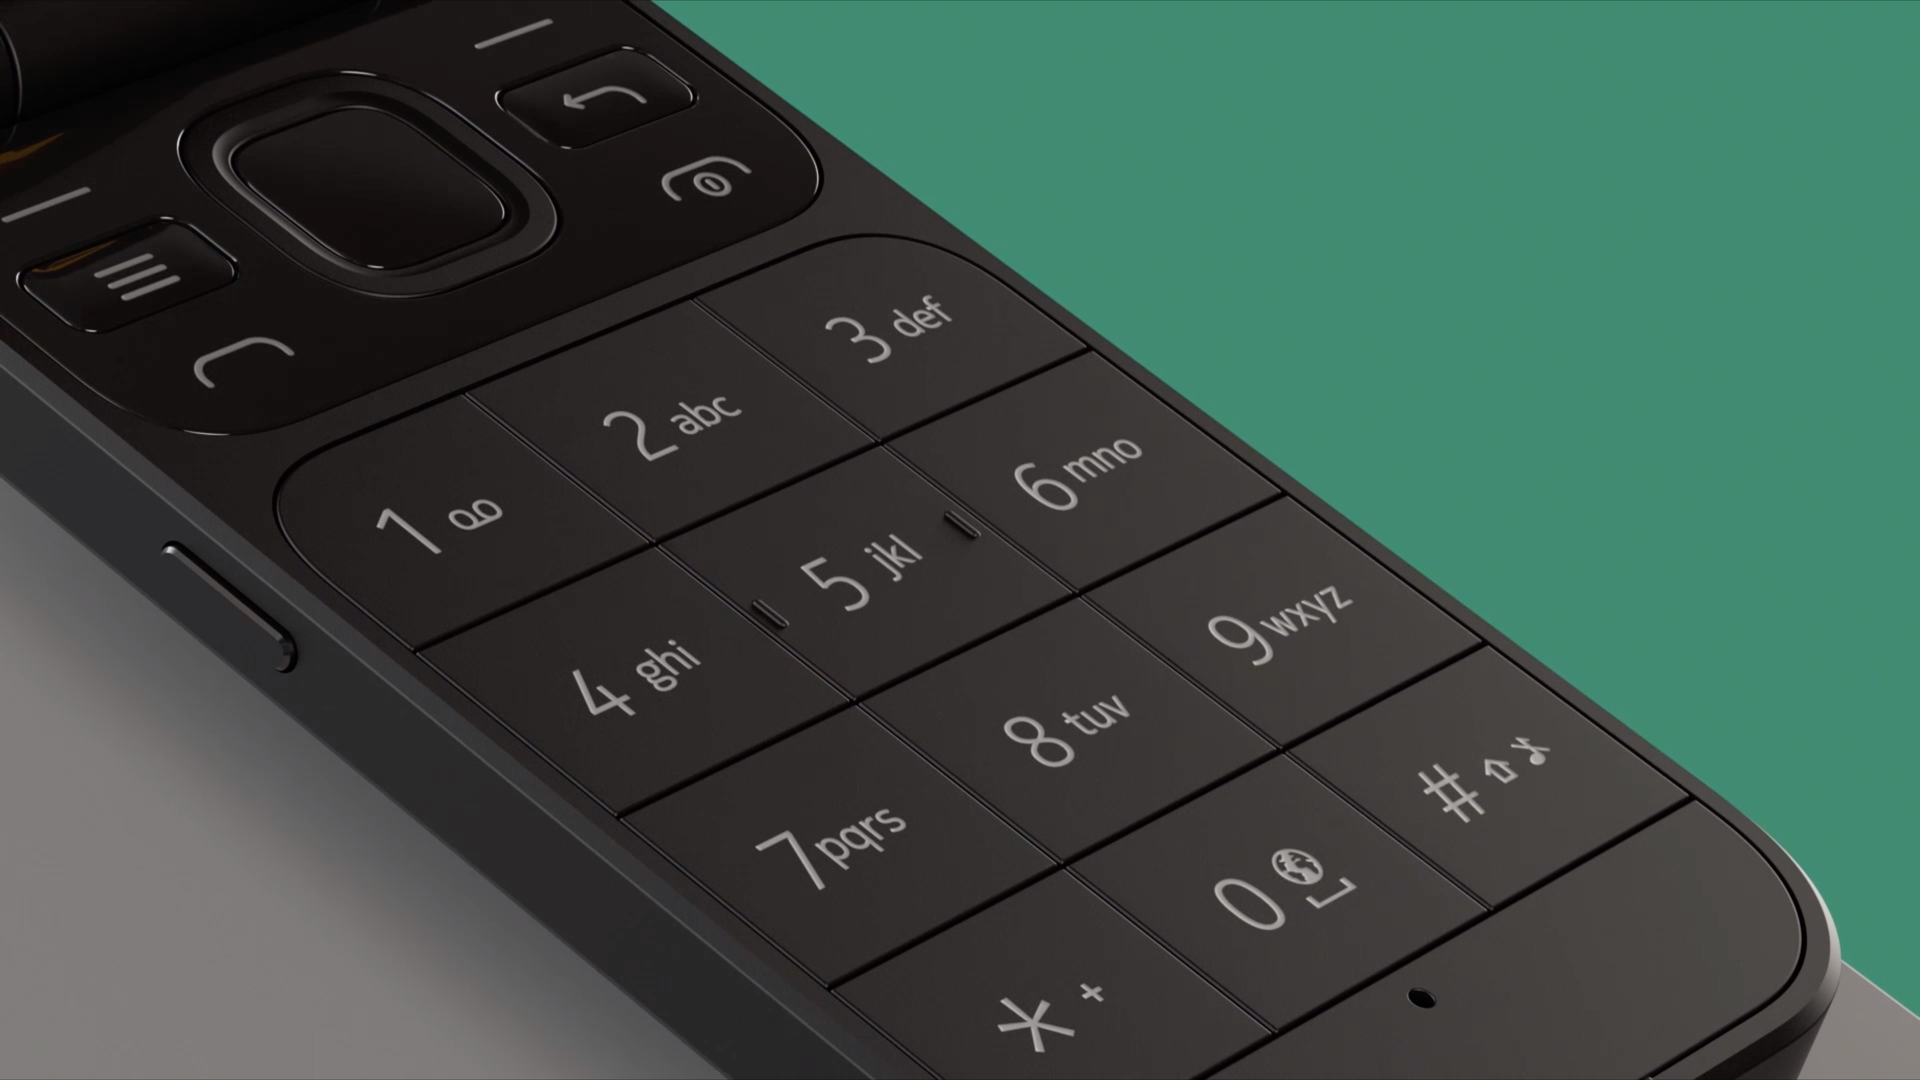 Return of the flip phone: Nokia launches 2720 Flip that's perfect for  digital detoxes - Mirror Online